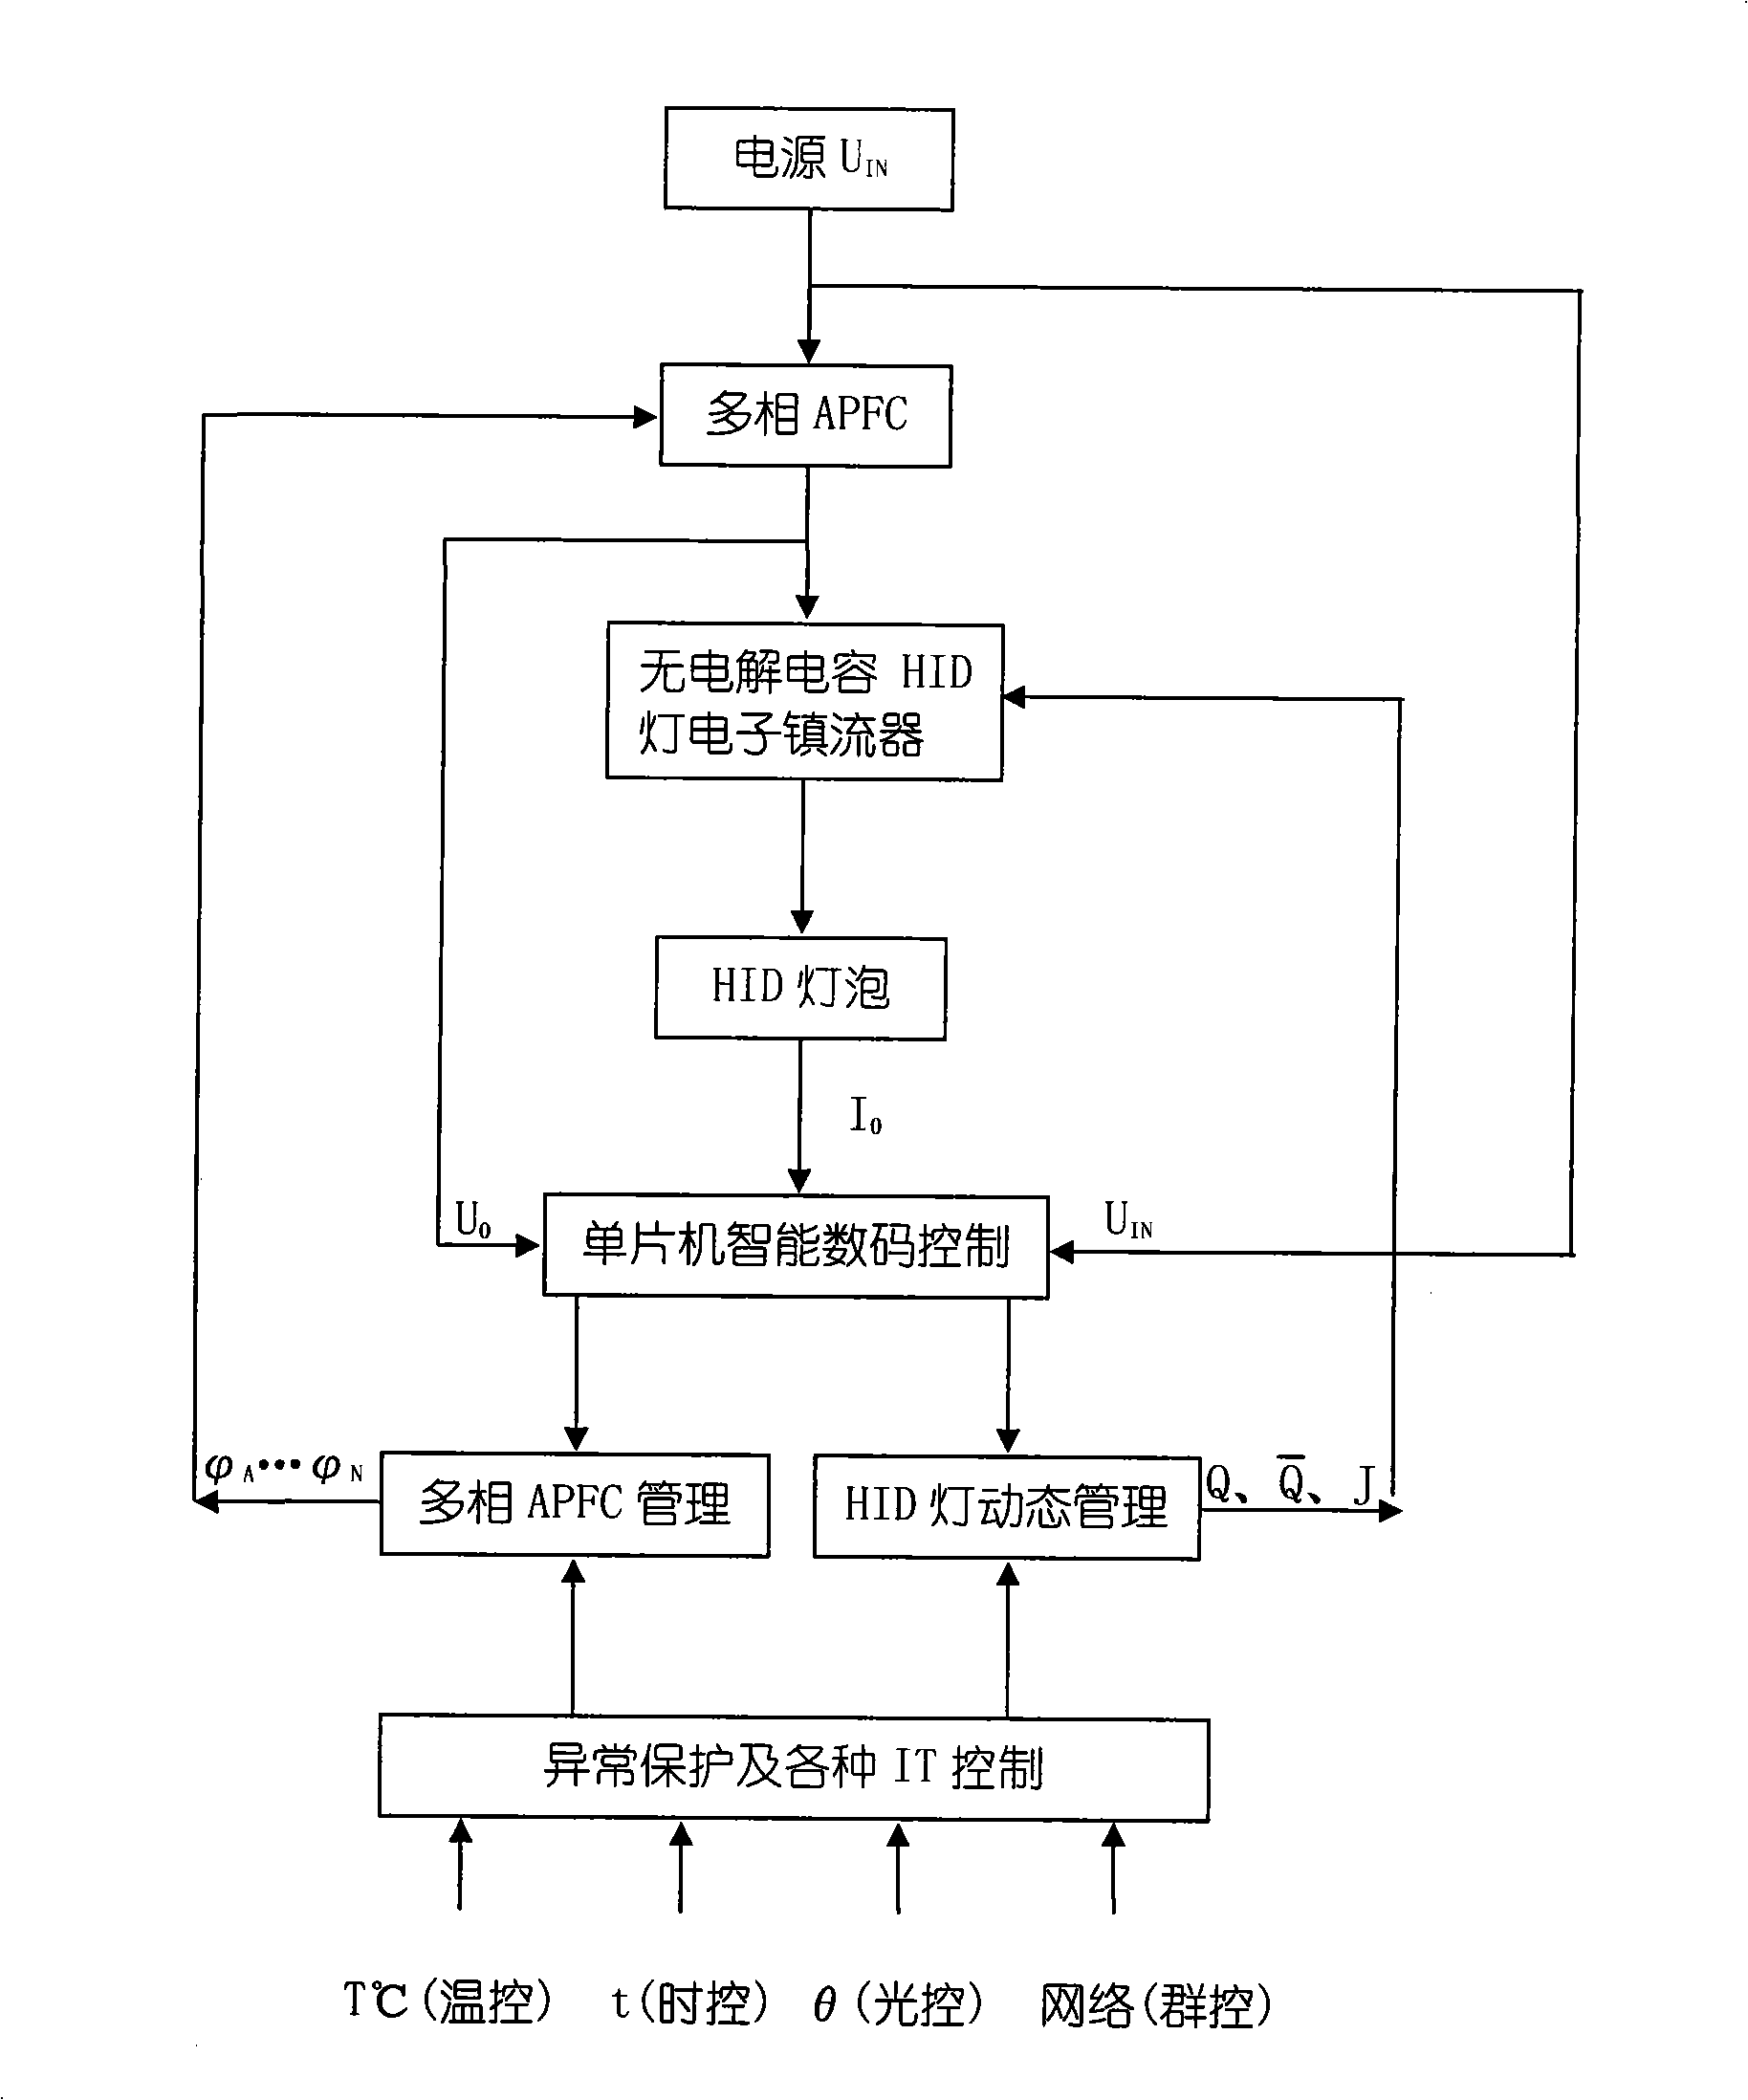 Control method for electronic ballast of HID light without electrolytic capacitor